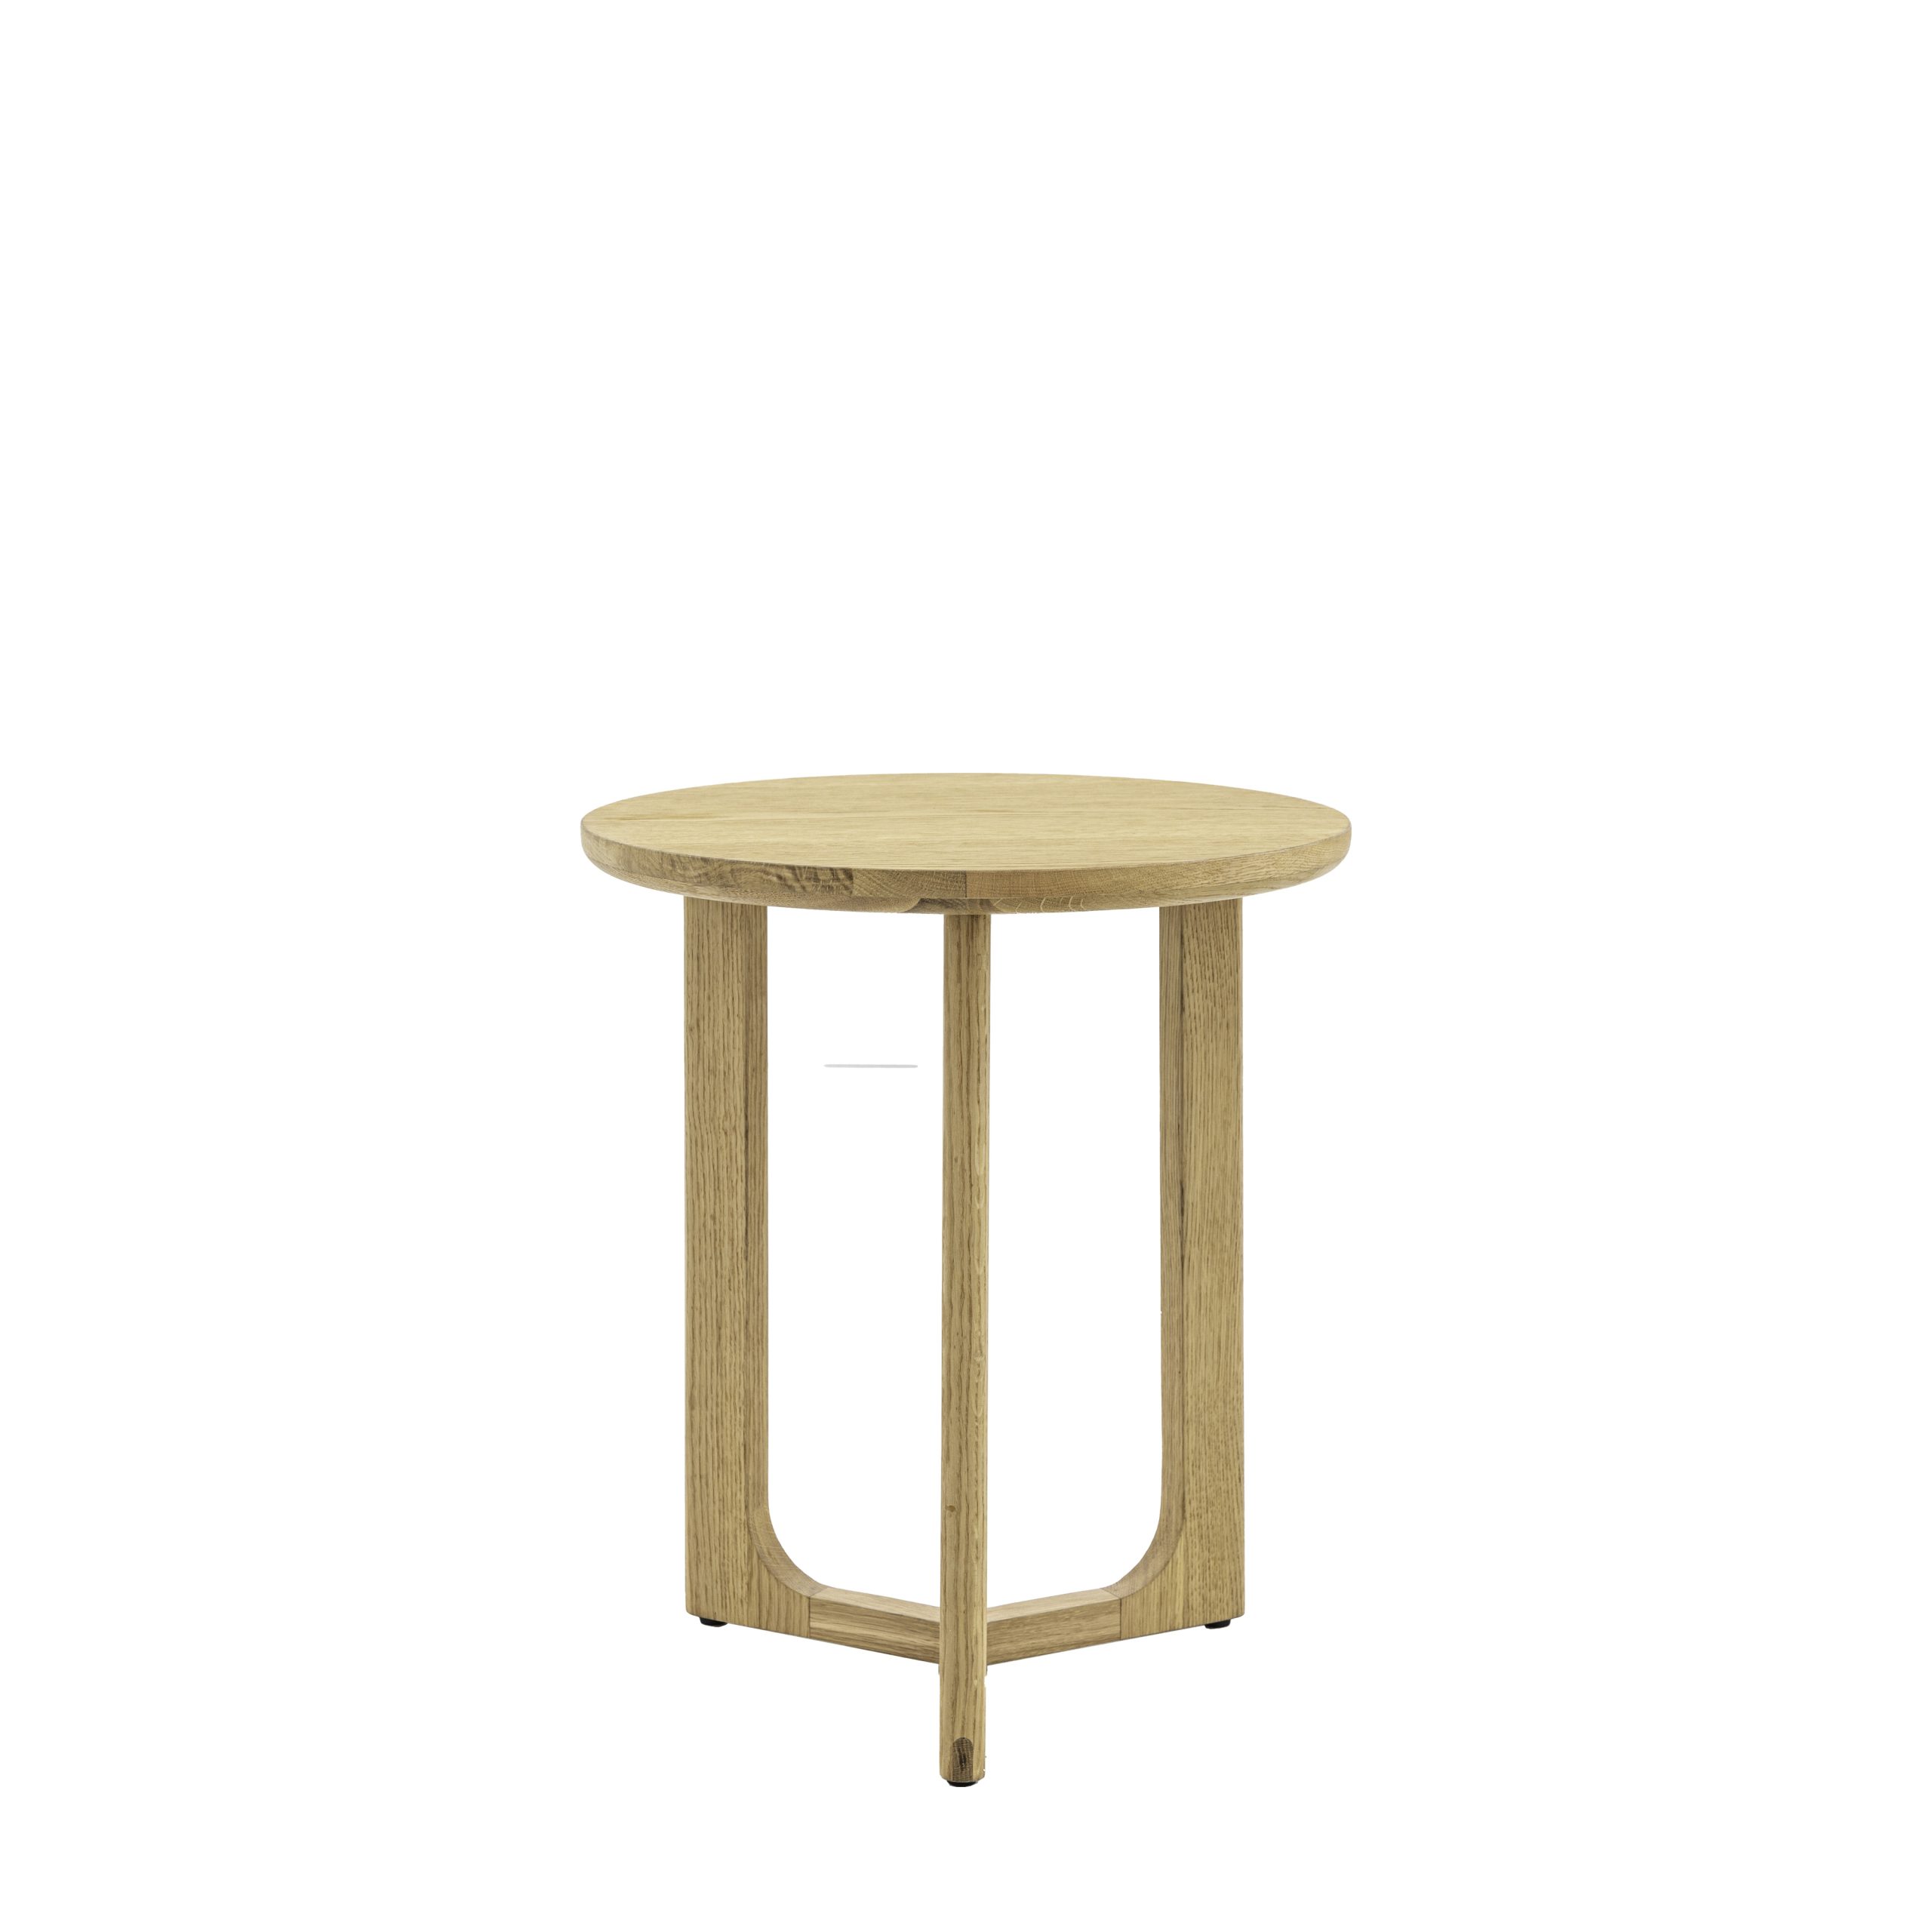 Gallery Direct Craft Side Table Natural